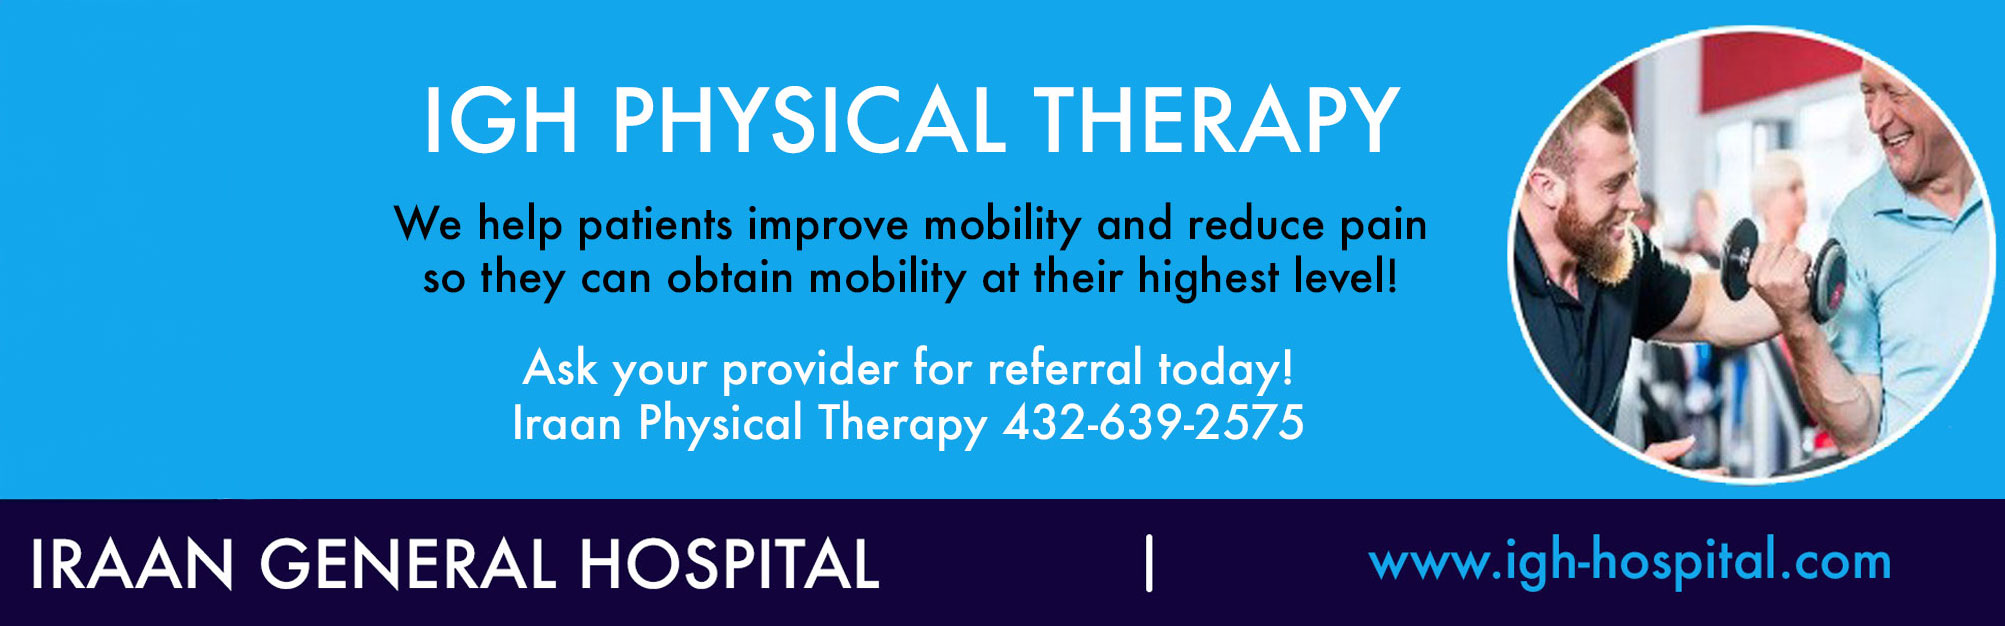 IGH PHYSICAL THERAPY

We help patients improve mobility and reduce pain so that they can obtain mobility at their highest level!

Ask your provider for referral today!
Iraan Physical Therapy (432)-639-2575

IRAAN GENERAL HOSPITAL

www.igh-hospital.com